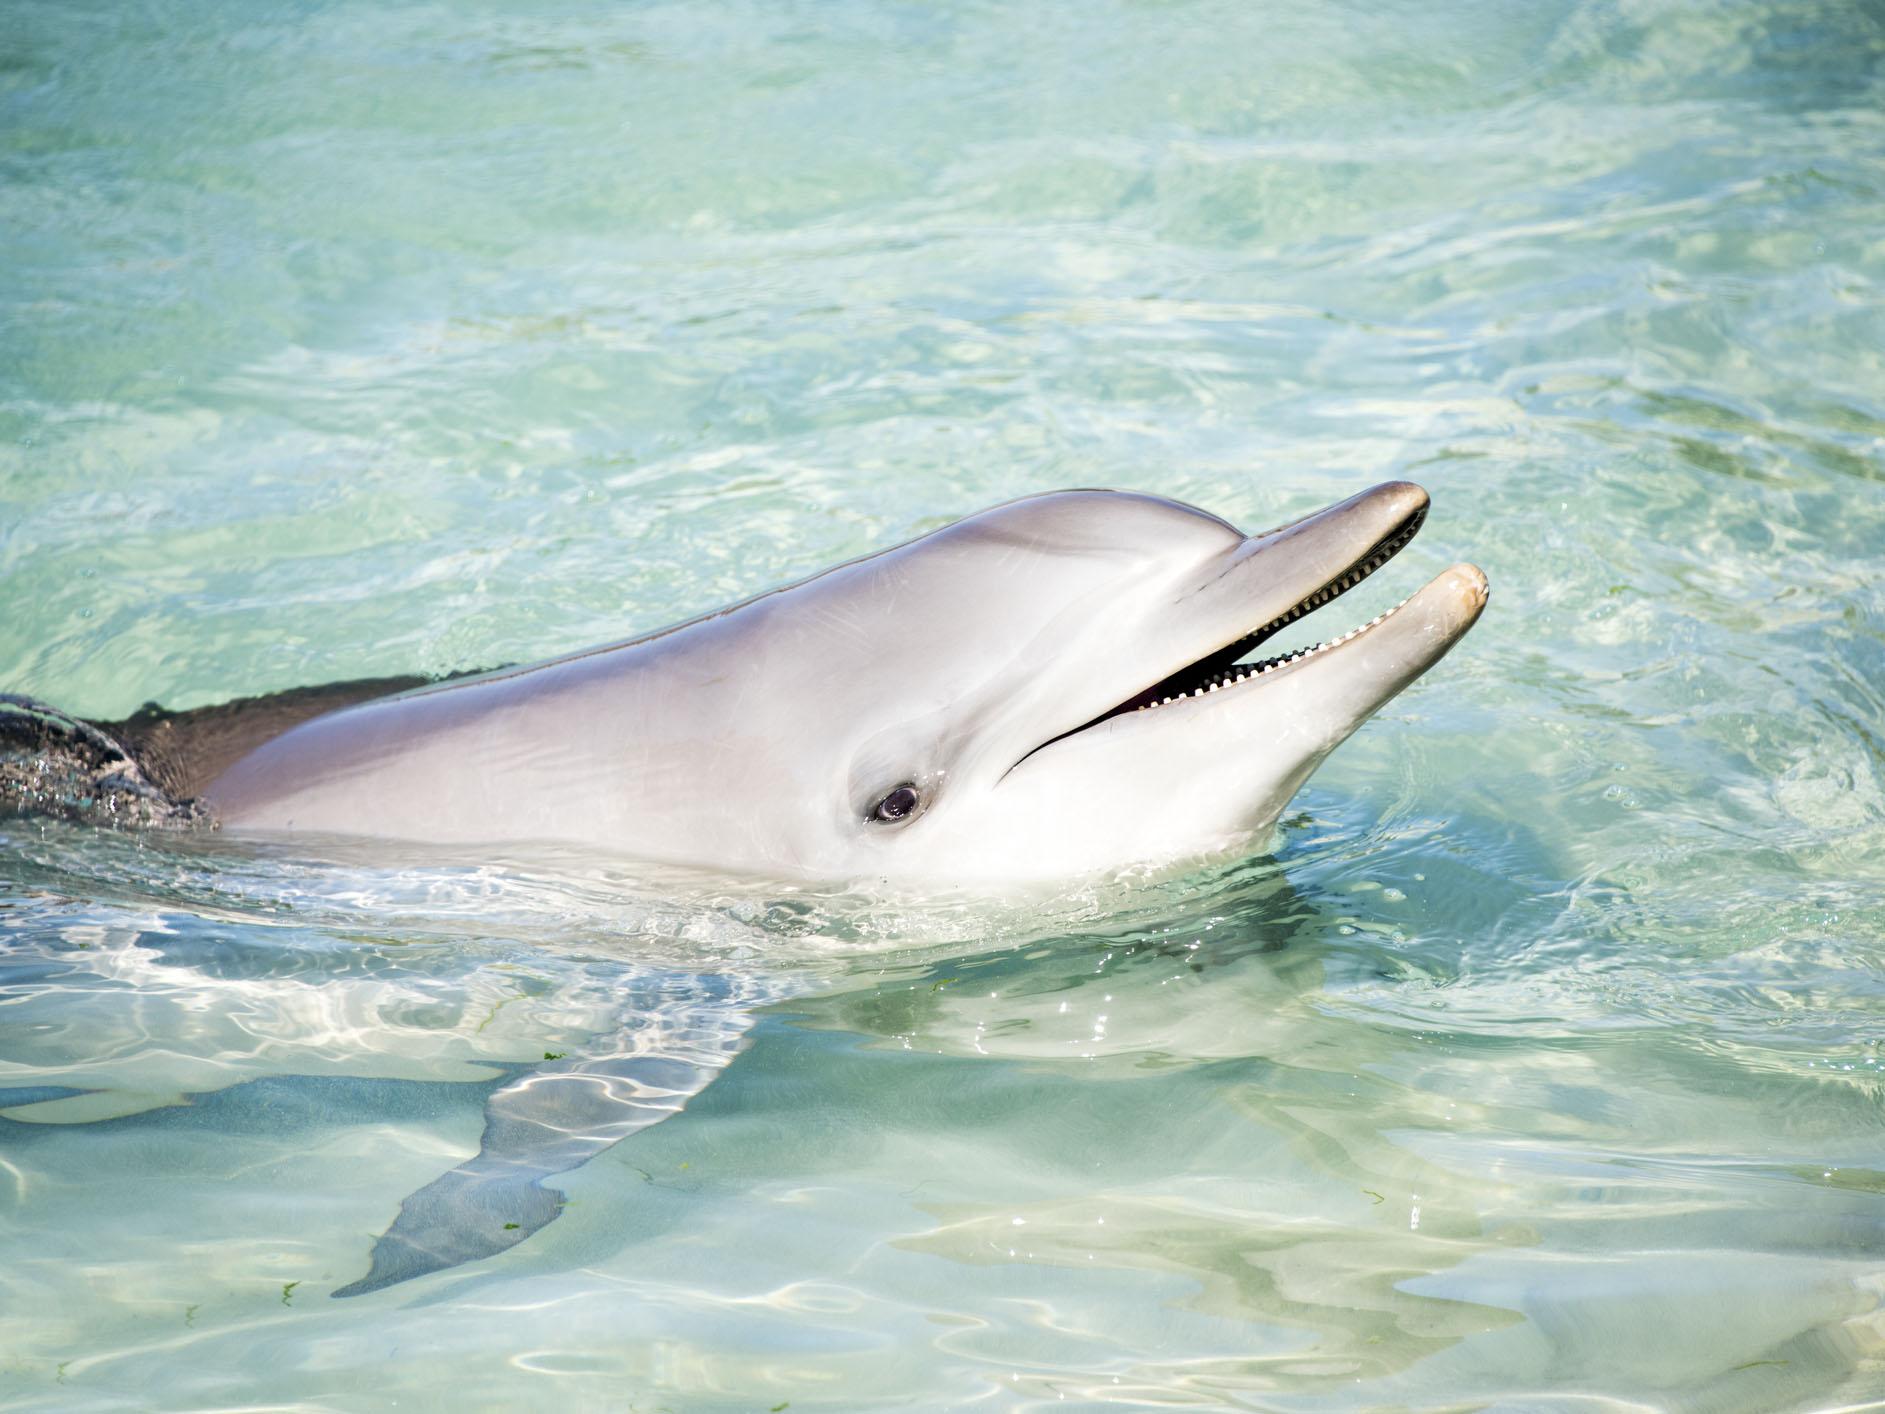 Scientists wanted to find out if female dolphins get any pleasure from sex